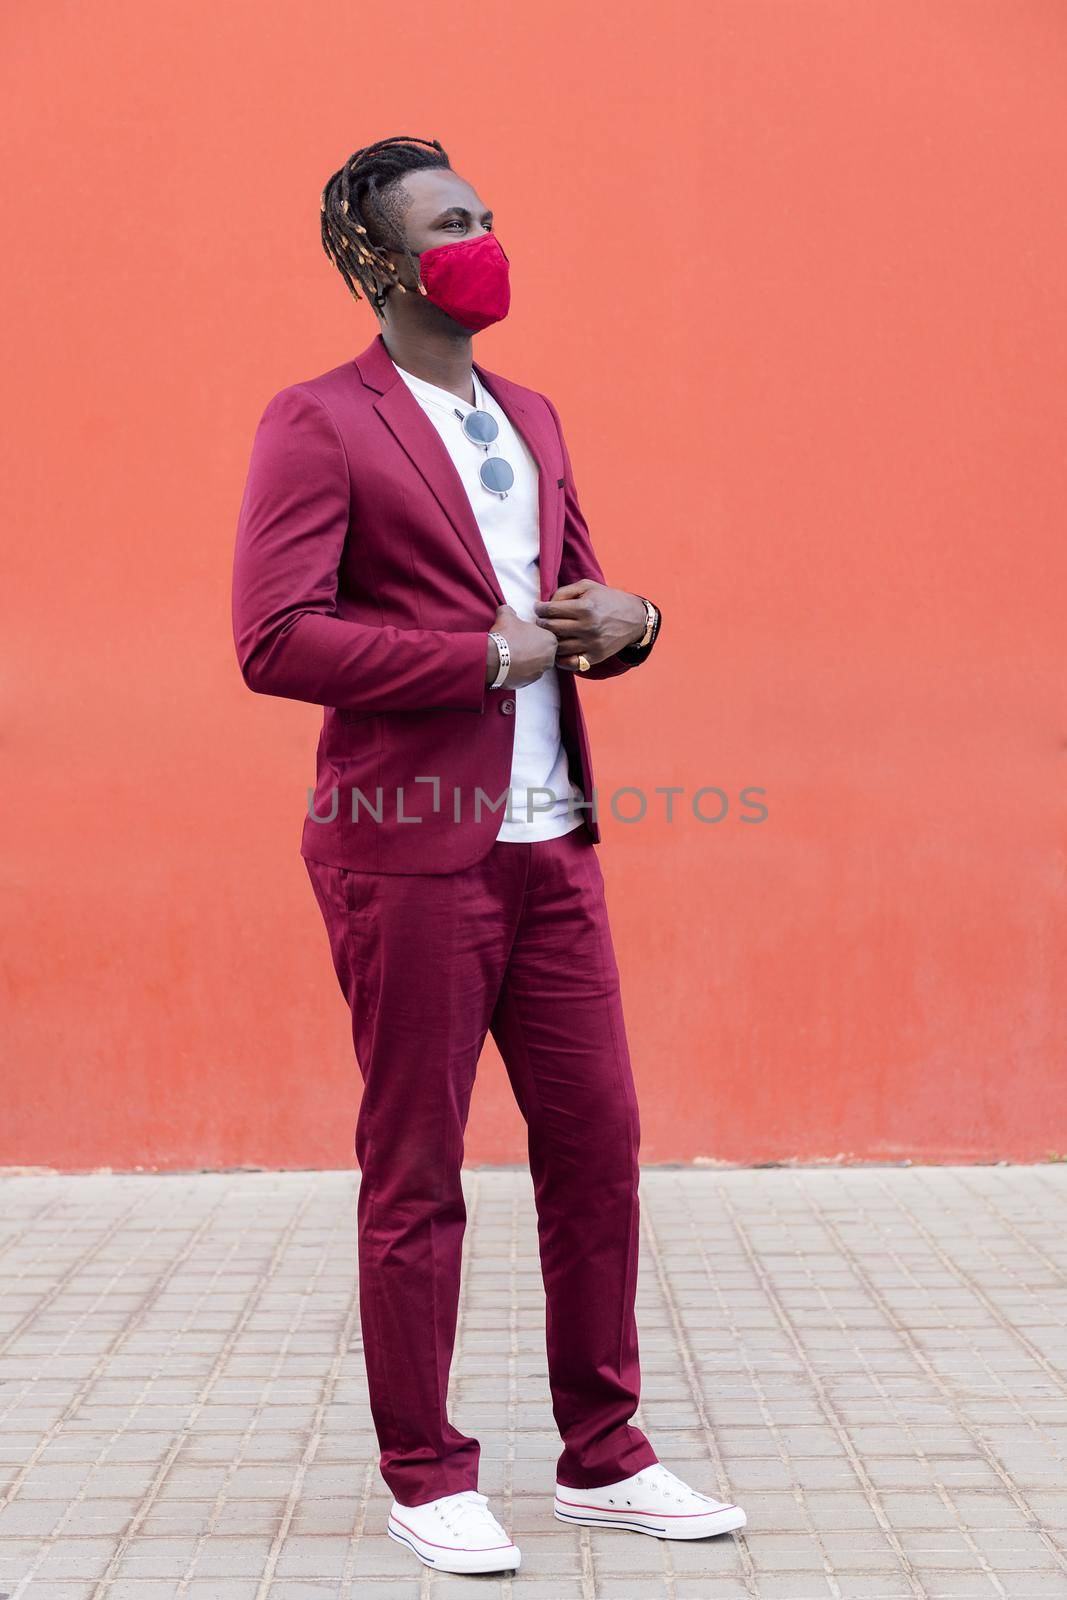 vertical photo of a handsome black man with protective mask to match his suit on a red background, concept of elegance and fashionable lifestyle